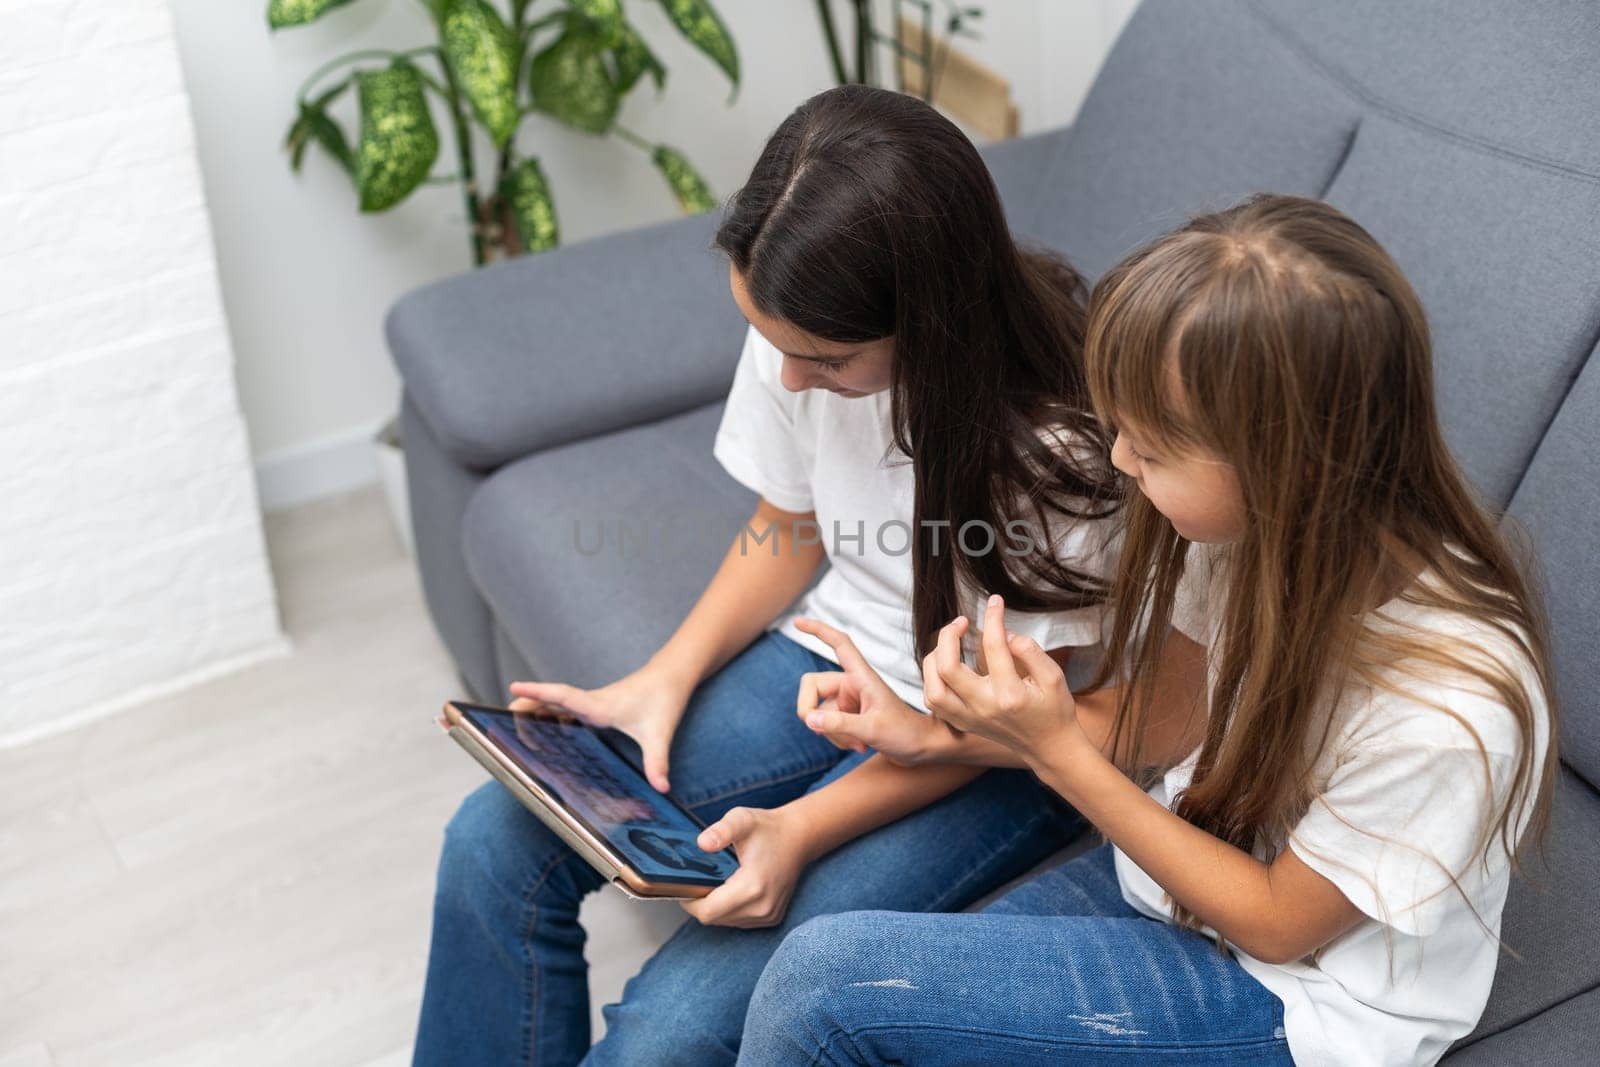 Shocked sisters using digital tablet on sofa at home by Andelov13